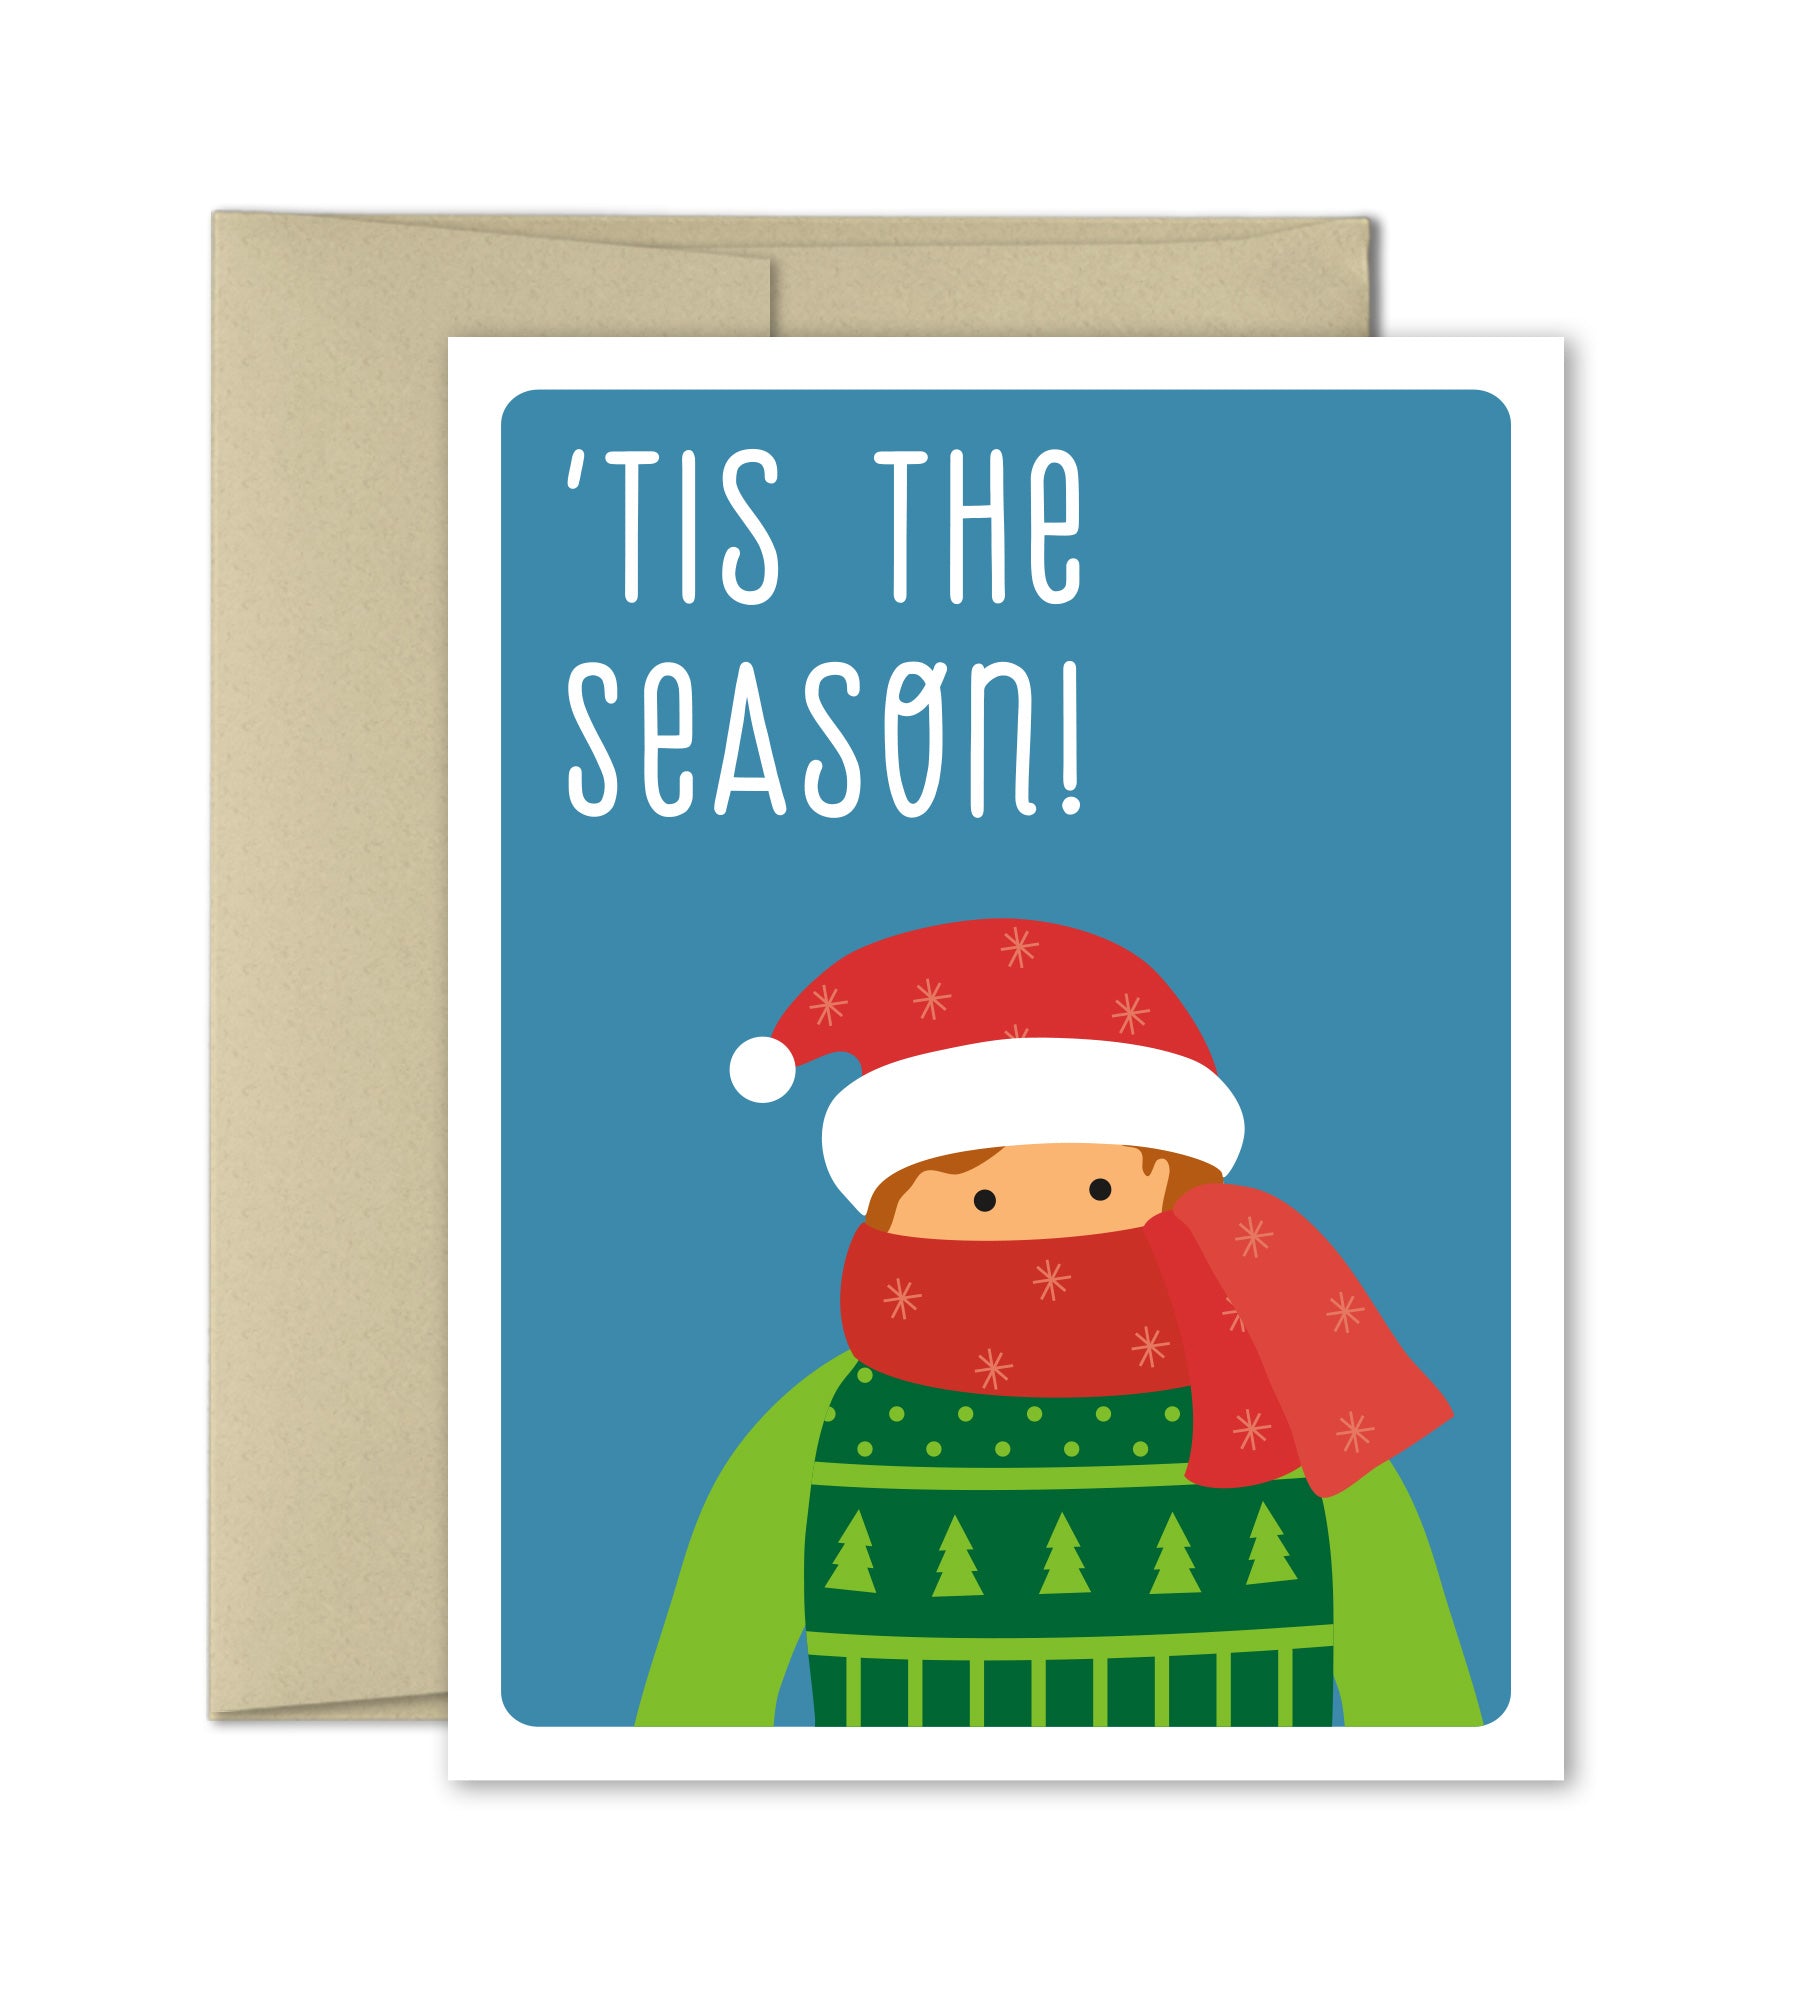 Cute Christmas Card - Bundle Up - Funny Holiday Card by The Imagination Spot